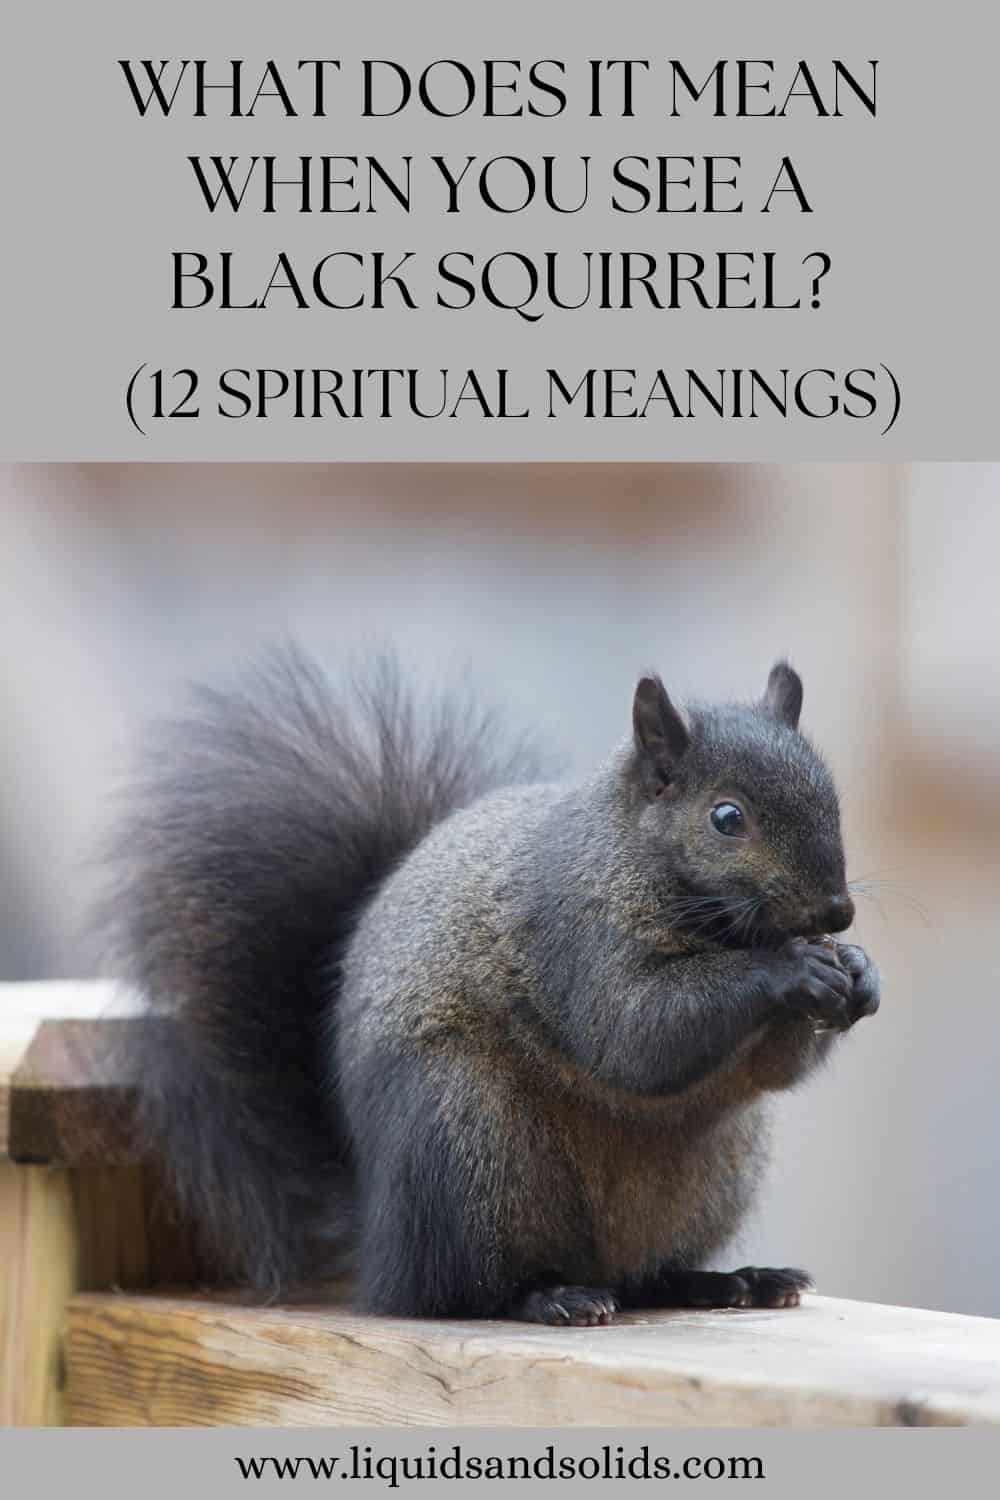 What Does It Mean When You See A Black Squirrel? (12 Spiritual Meanings)